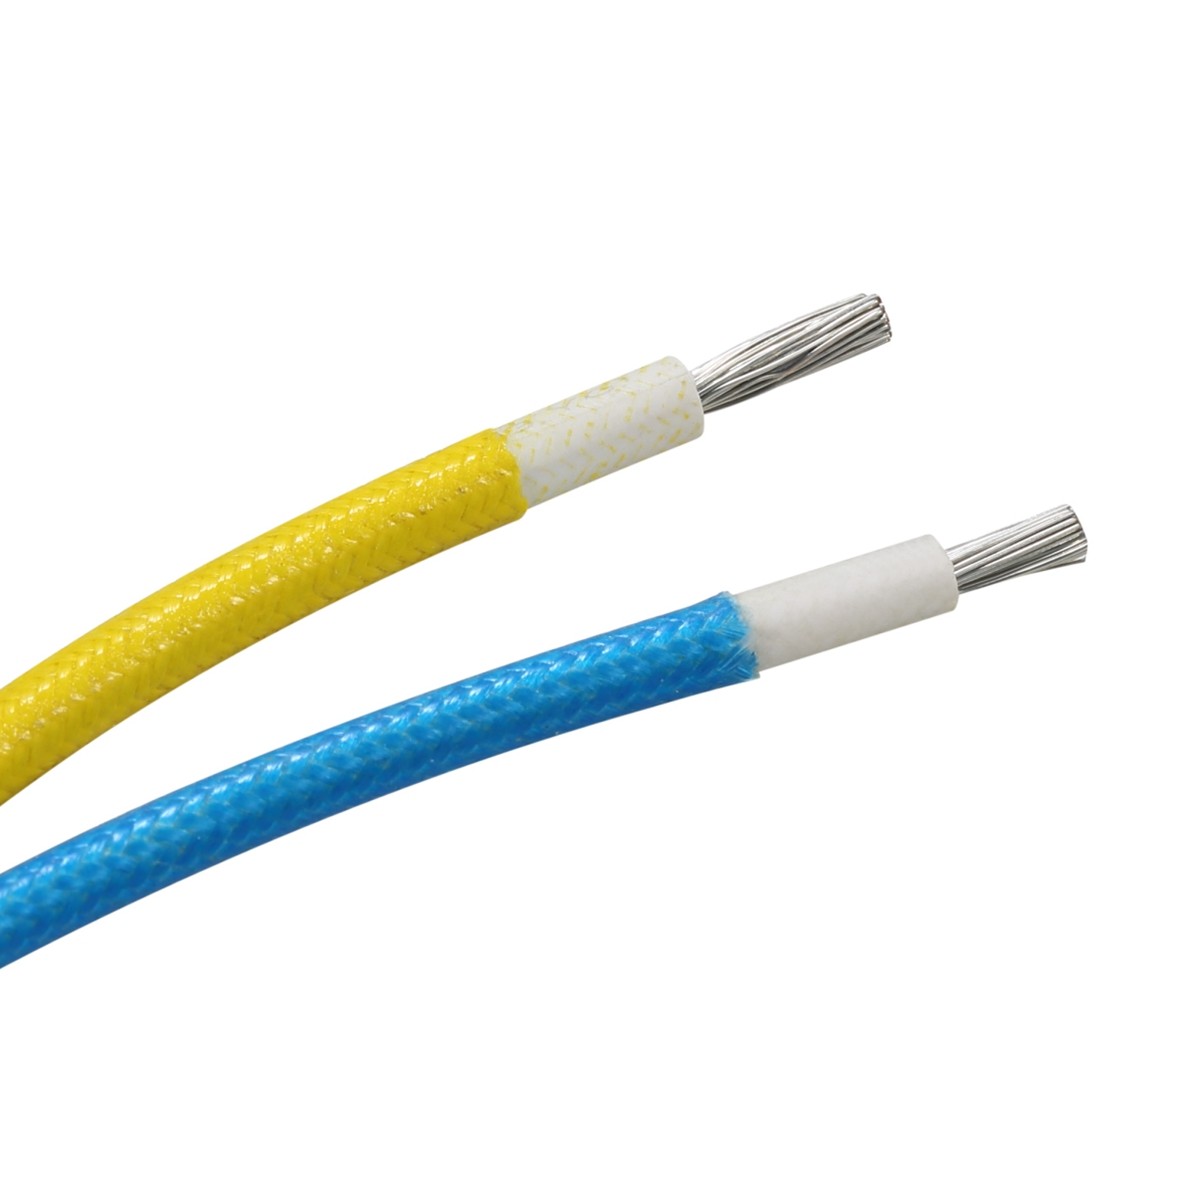 Fiberglass Braided Electrical Cable silicone insulation wire Heat Proof